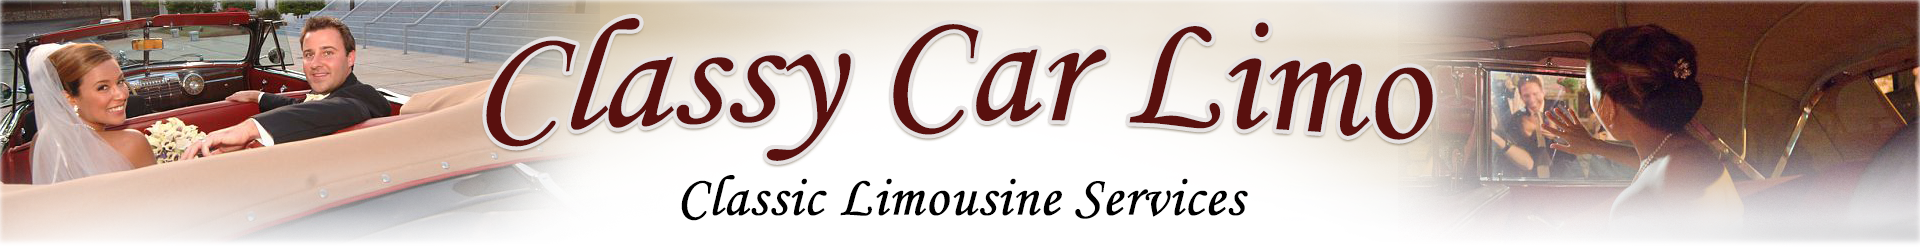 Classy Car Limo - Classic limousine services, including luxury wedding transportation and classic car appraisals